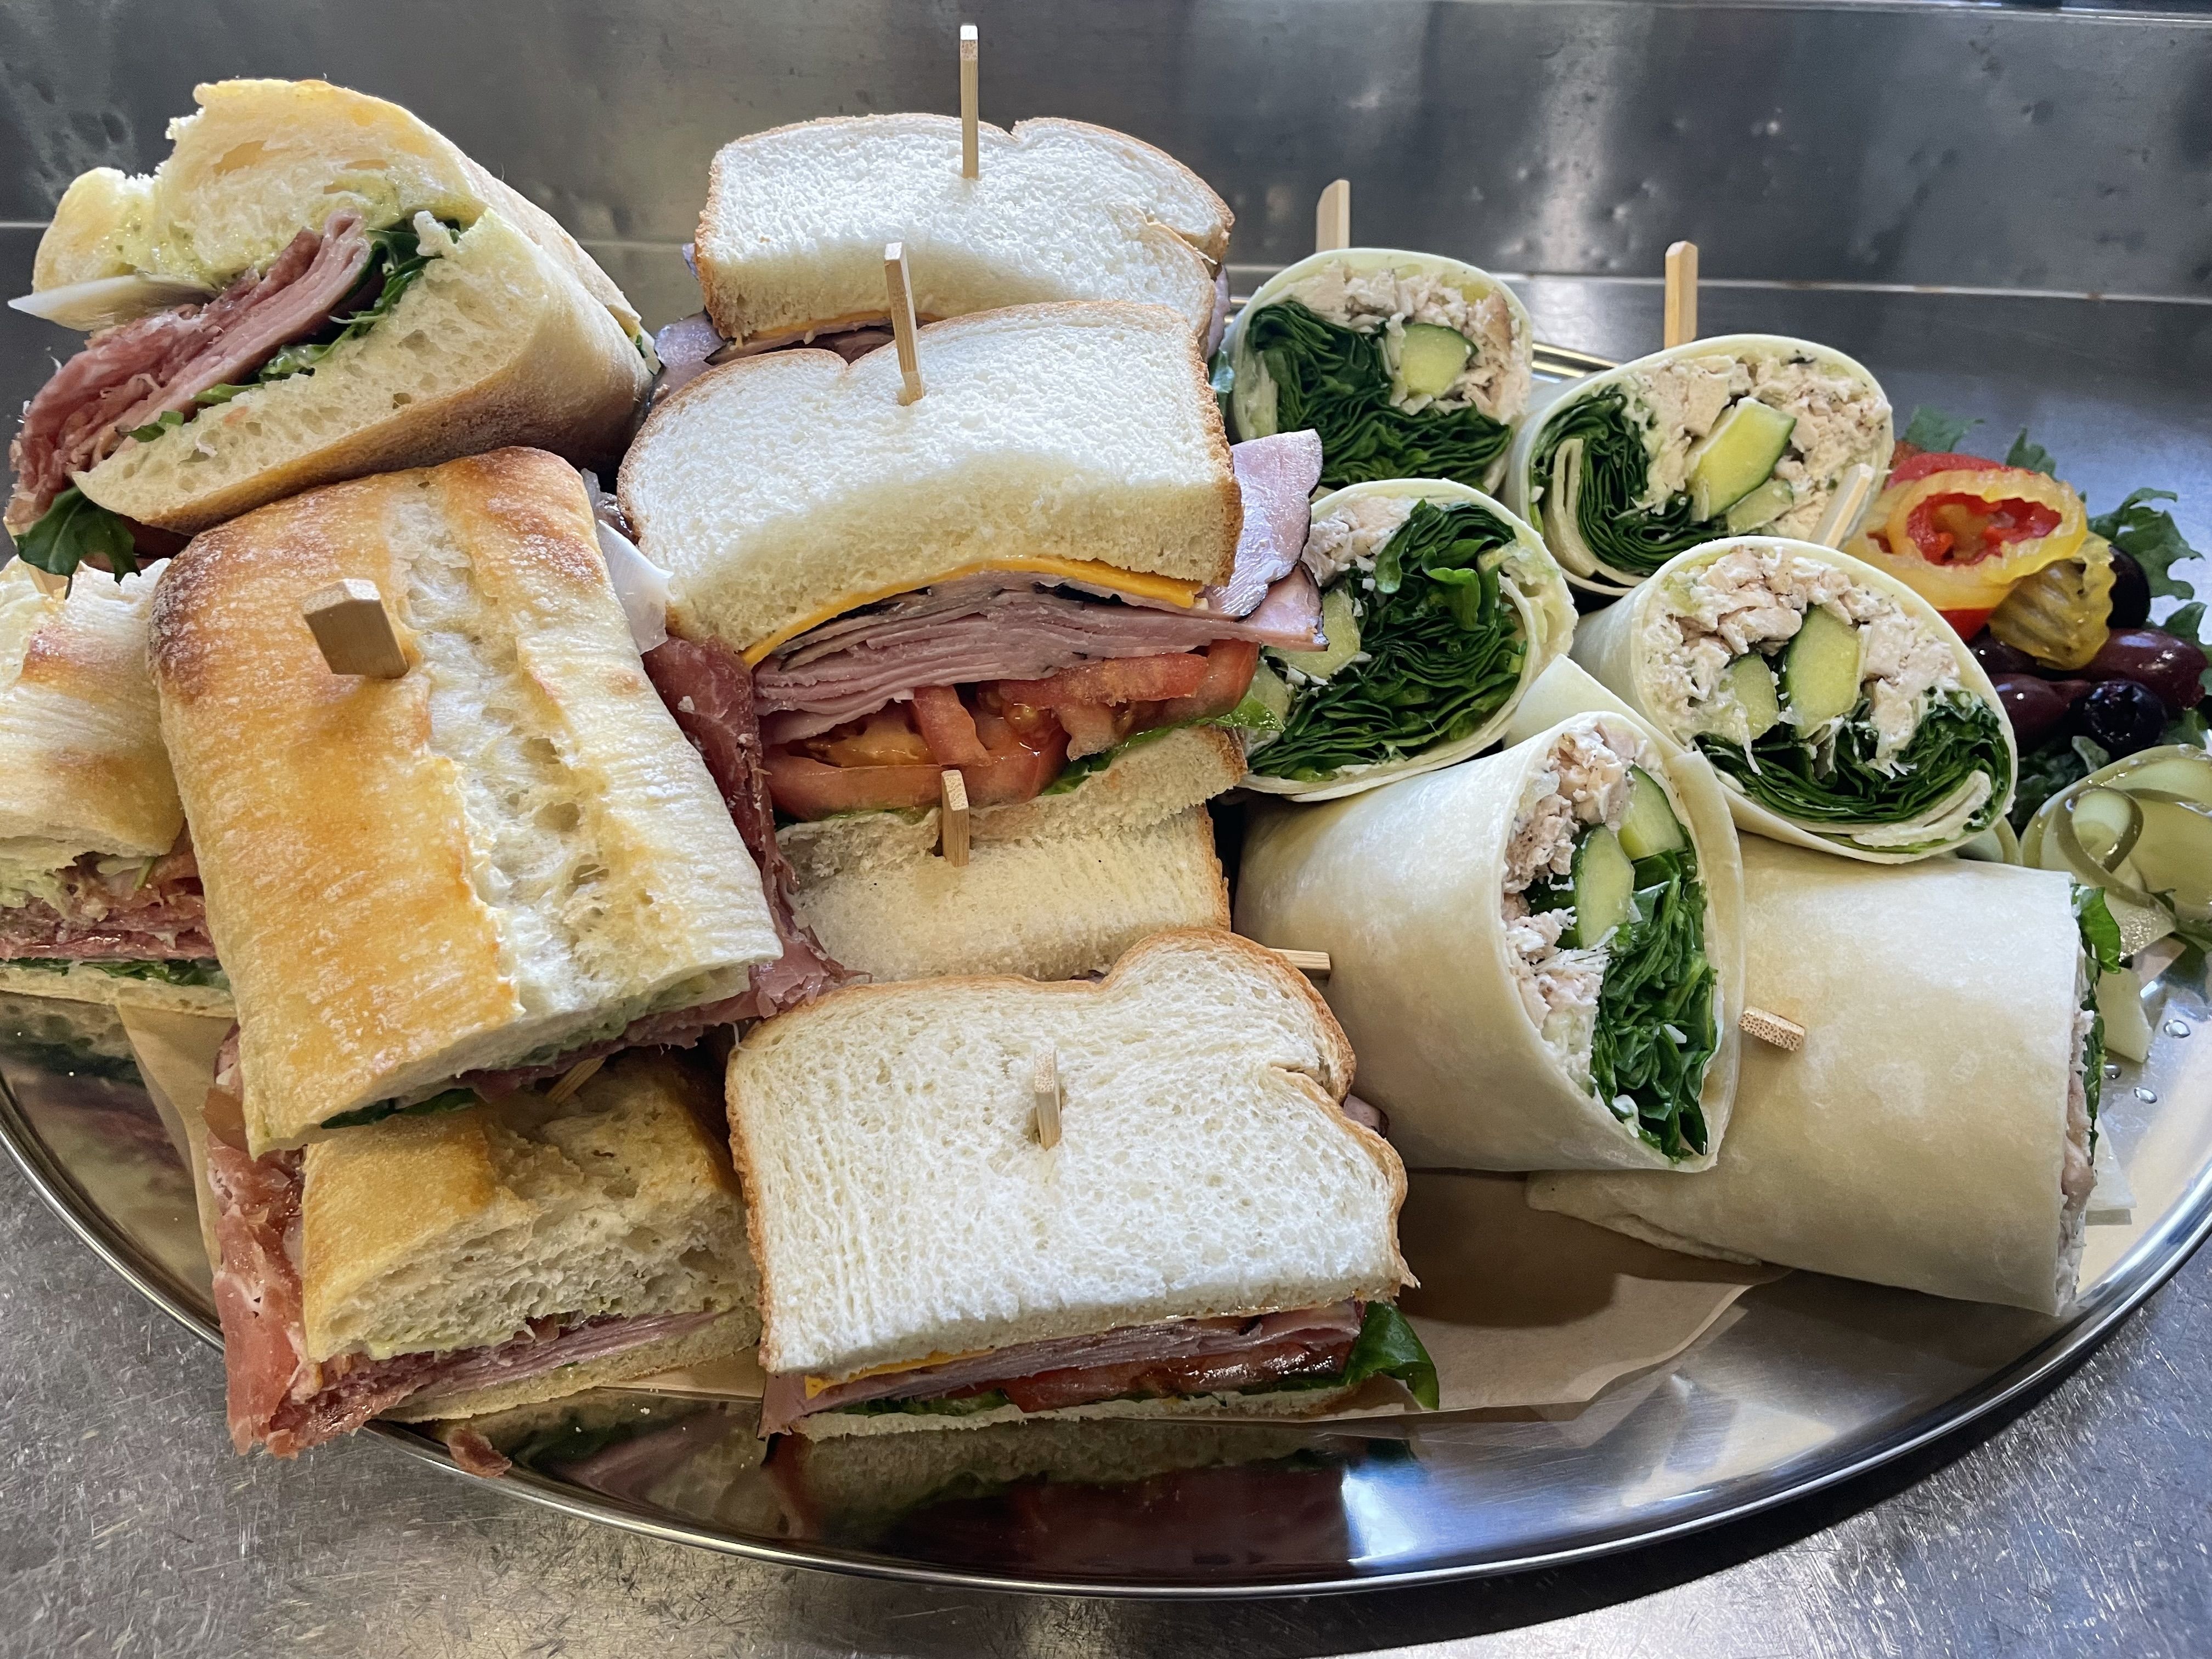 Cold Sandwiches and Wraps Platter- Small